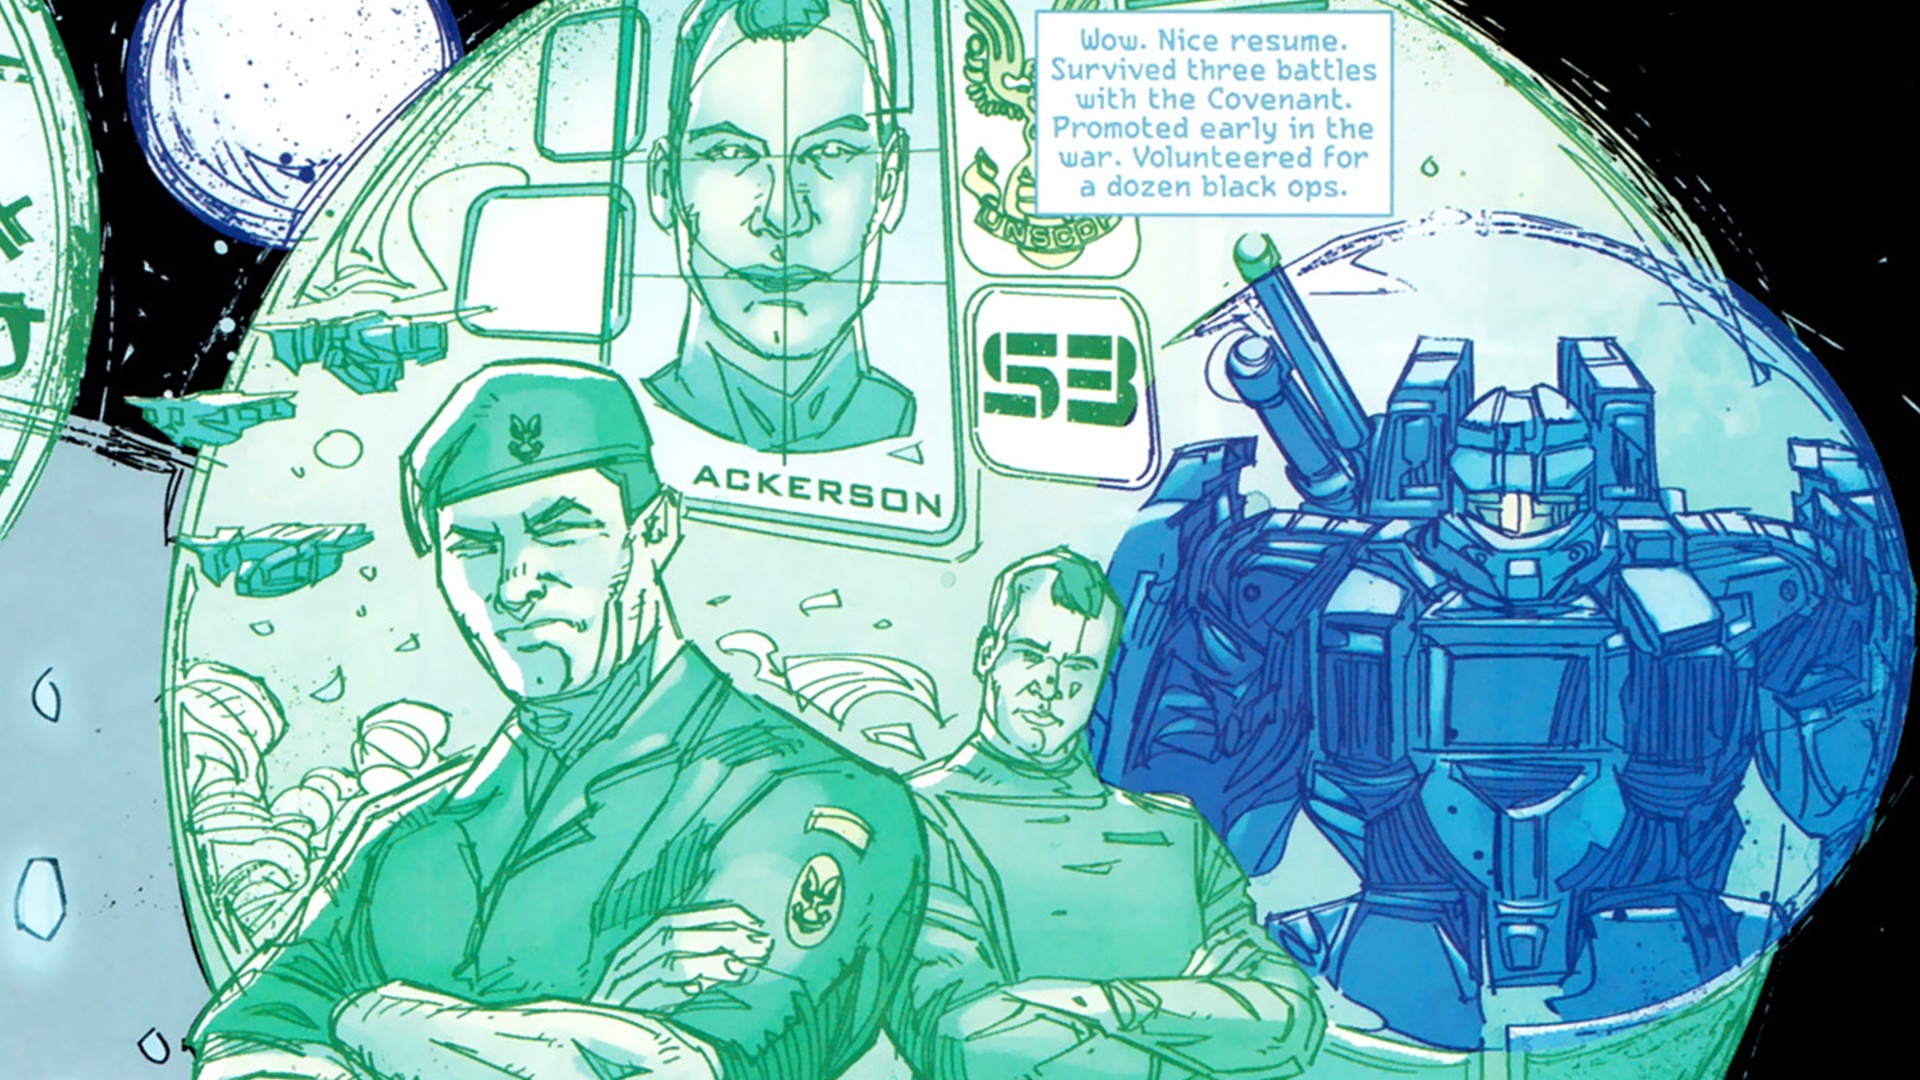 Crop of Cortana accessing James Ackerson's file from the comic Halo: Fall of Reach - Invasion, Issue 2